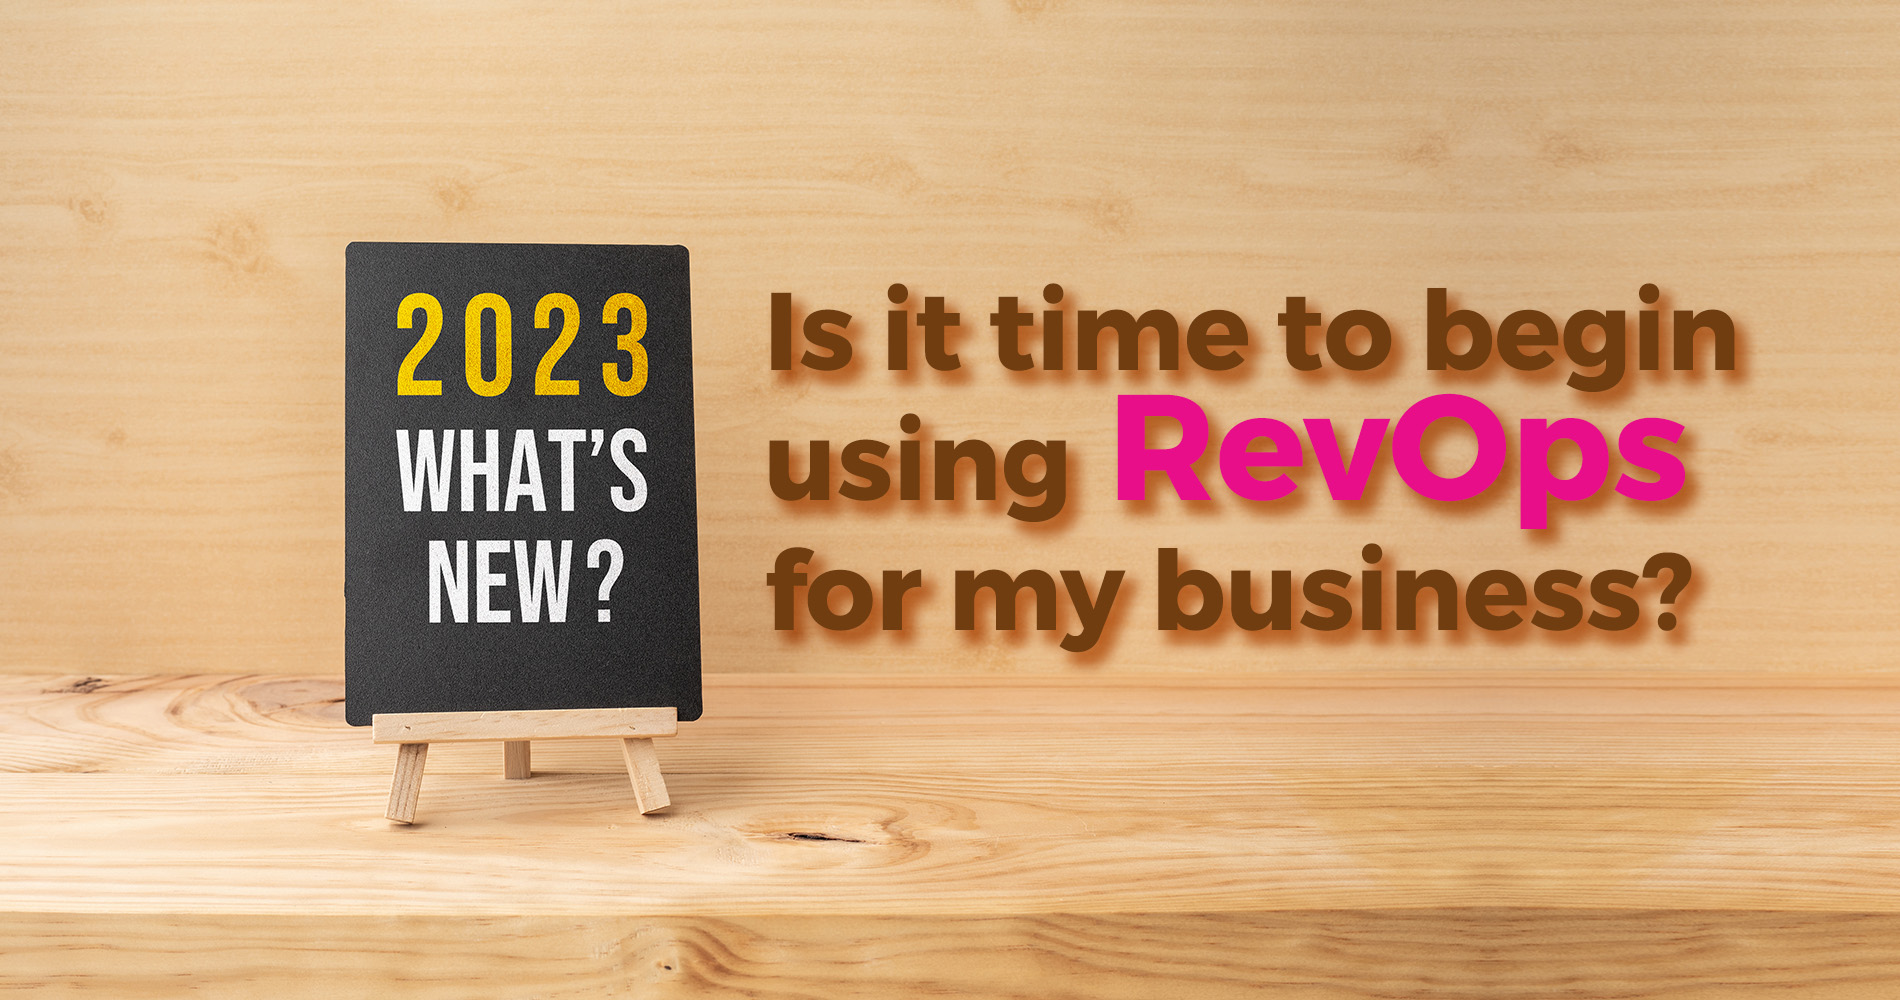 Is it time to begin using RevOps for my business?